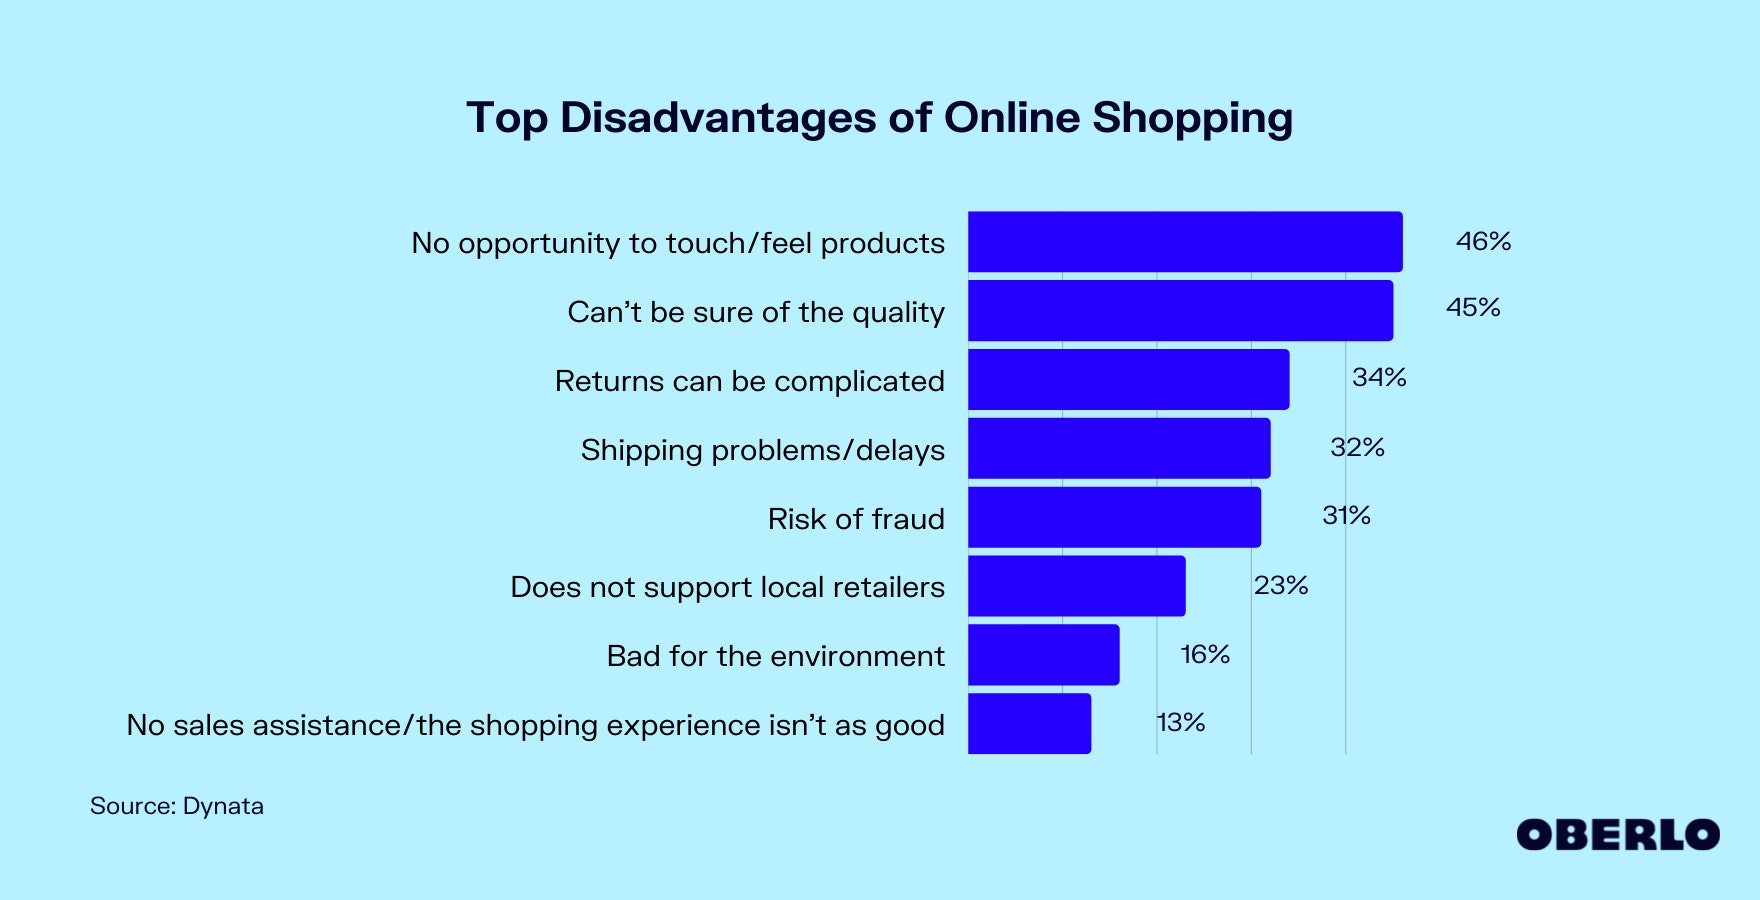 Chart of the Top Disadvantages of Online Shopping